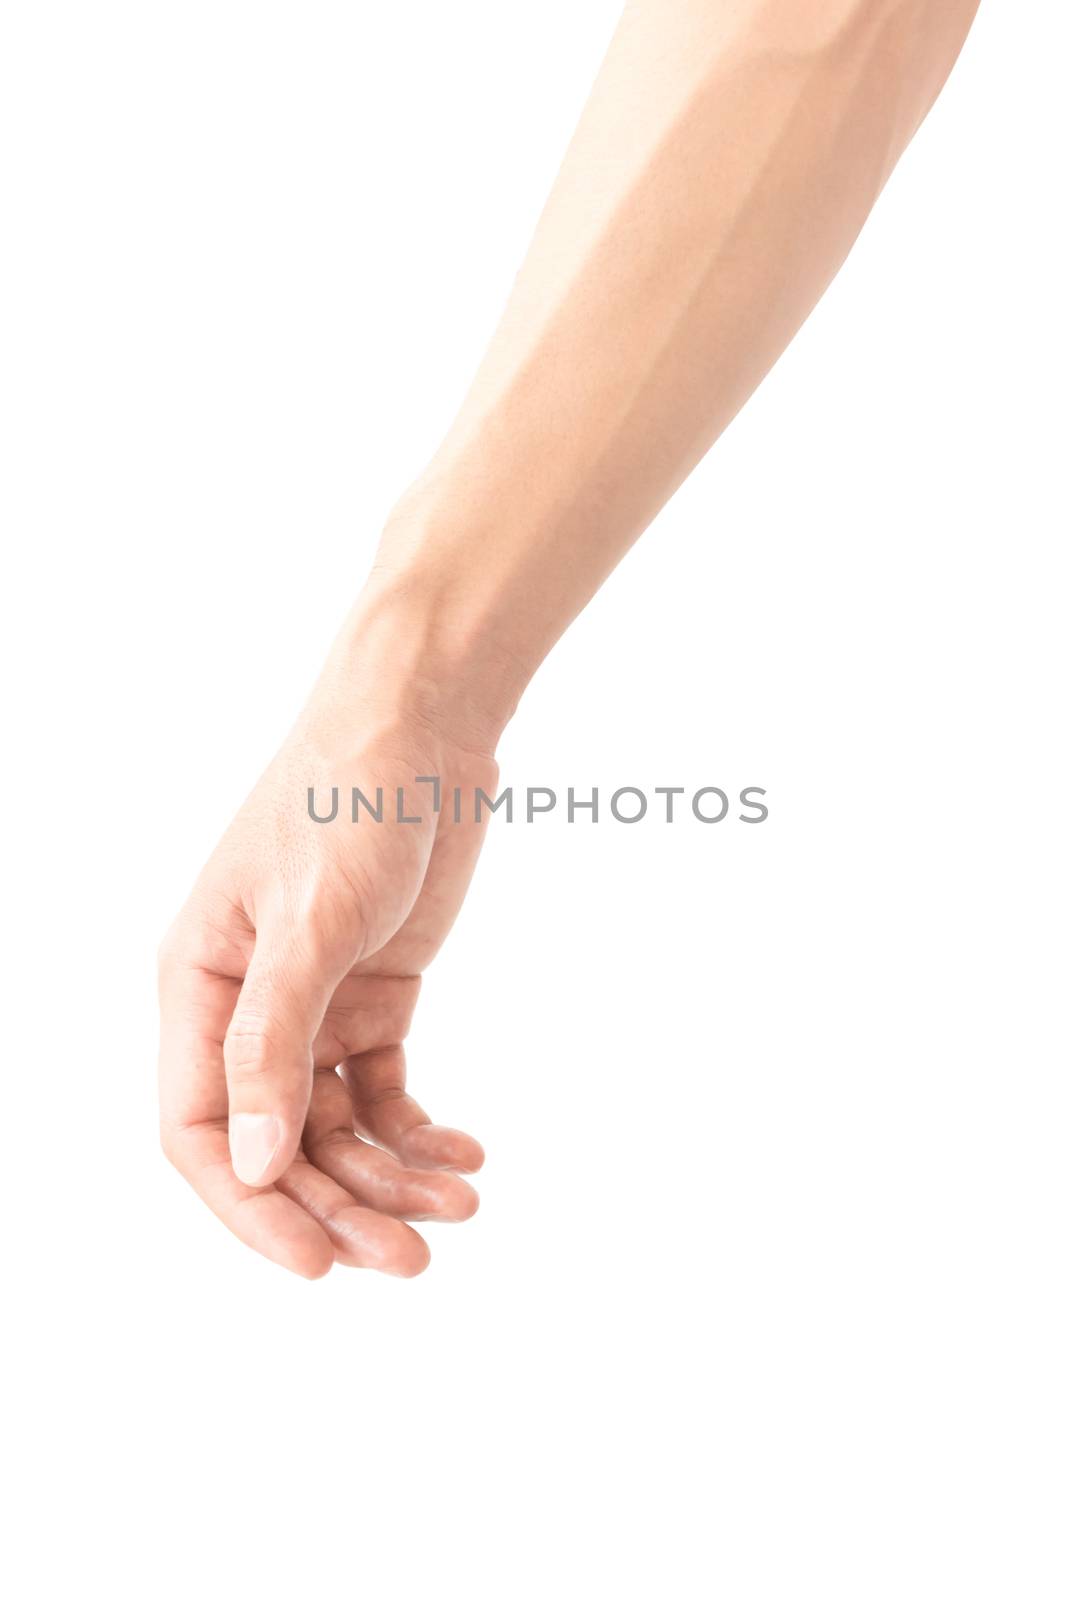 Man arm with blood veins on white background, health care and me by pt.pongsak@gmail.com